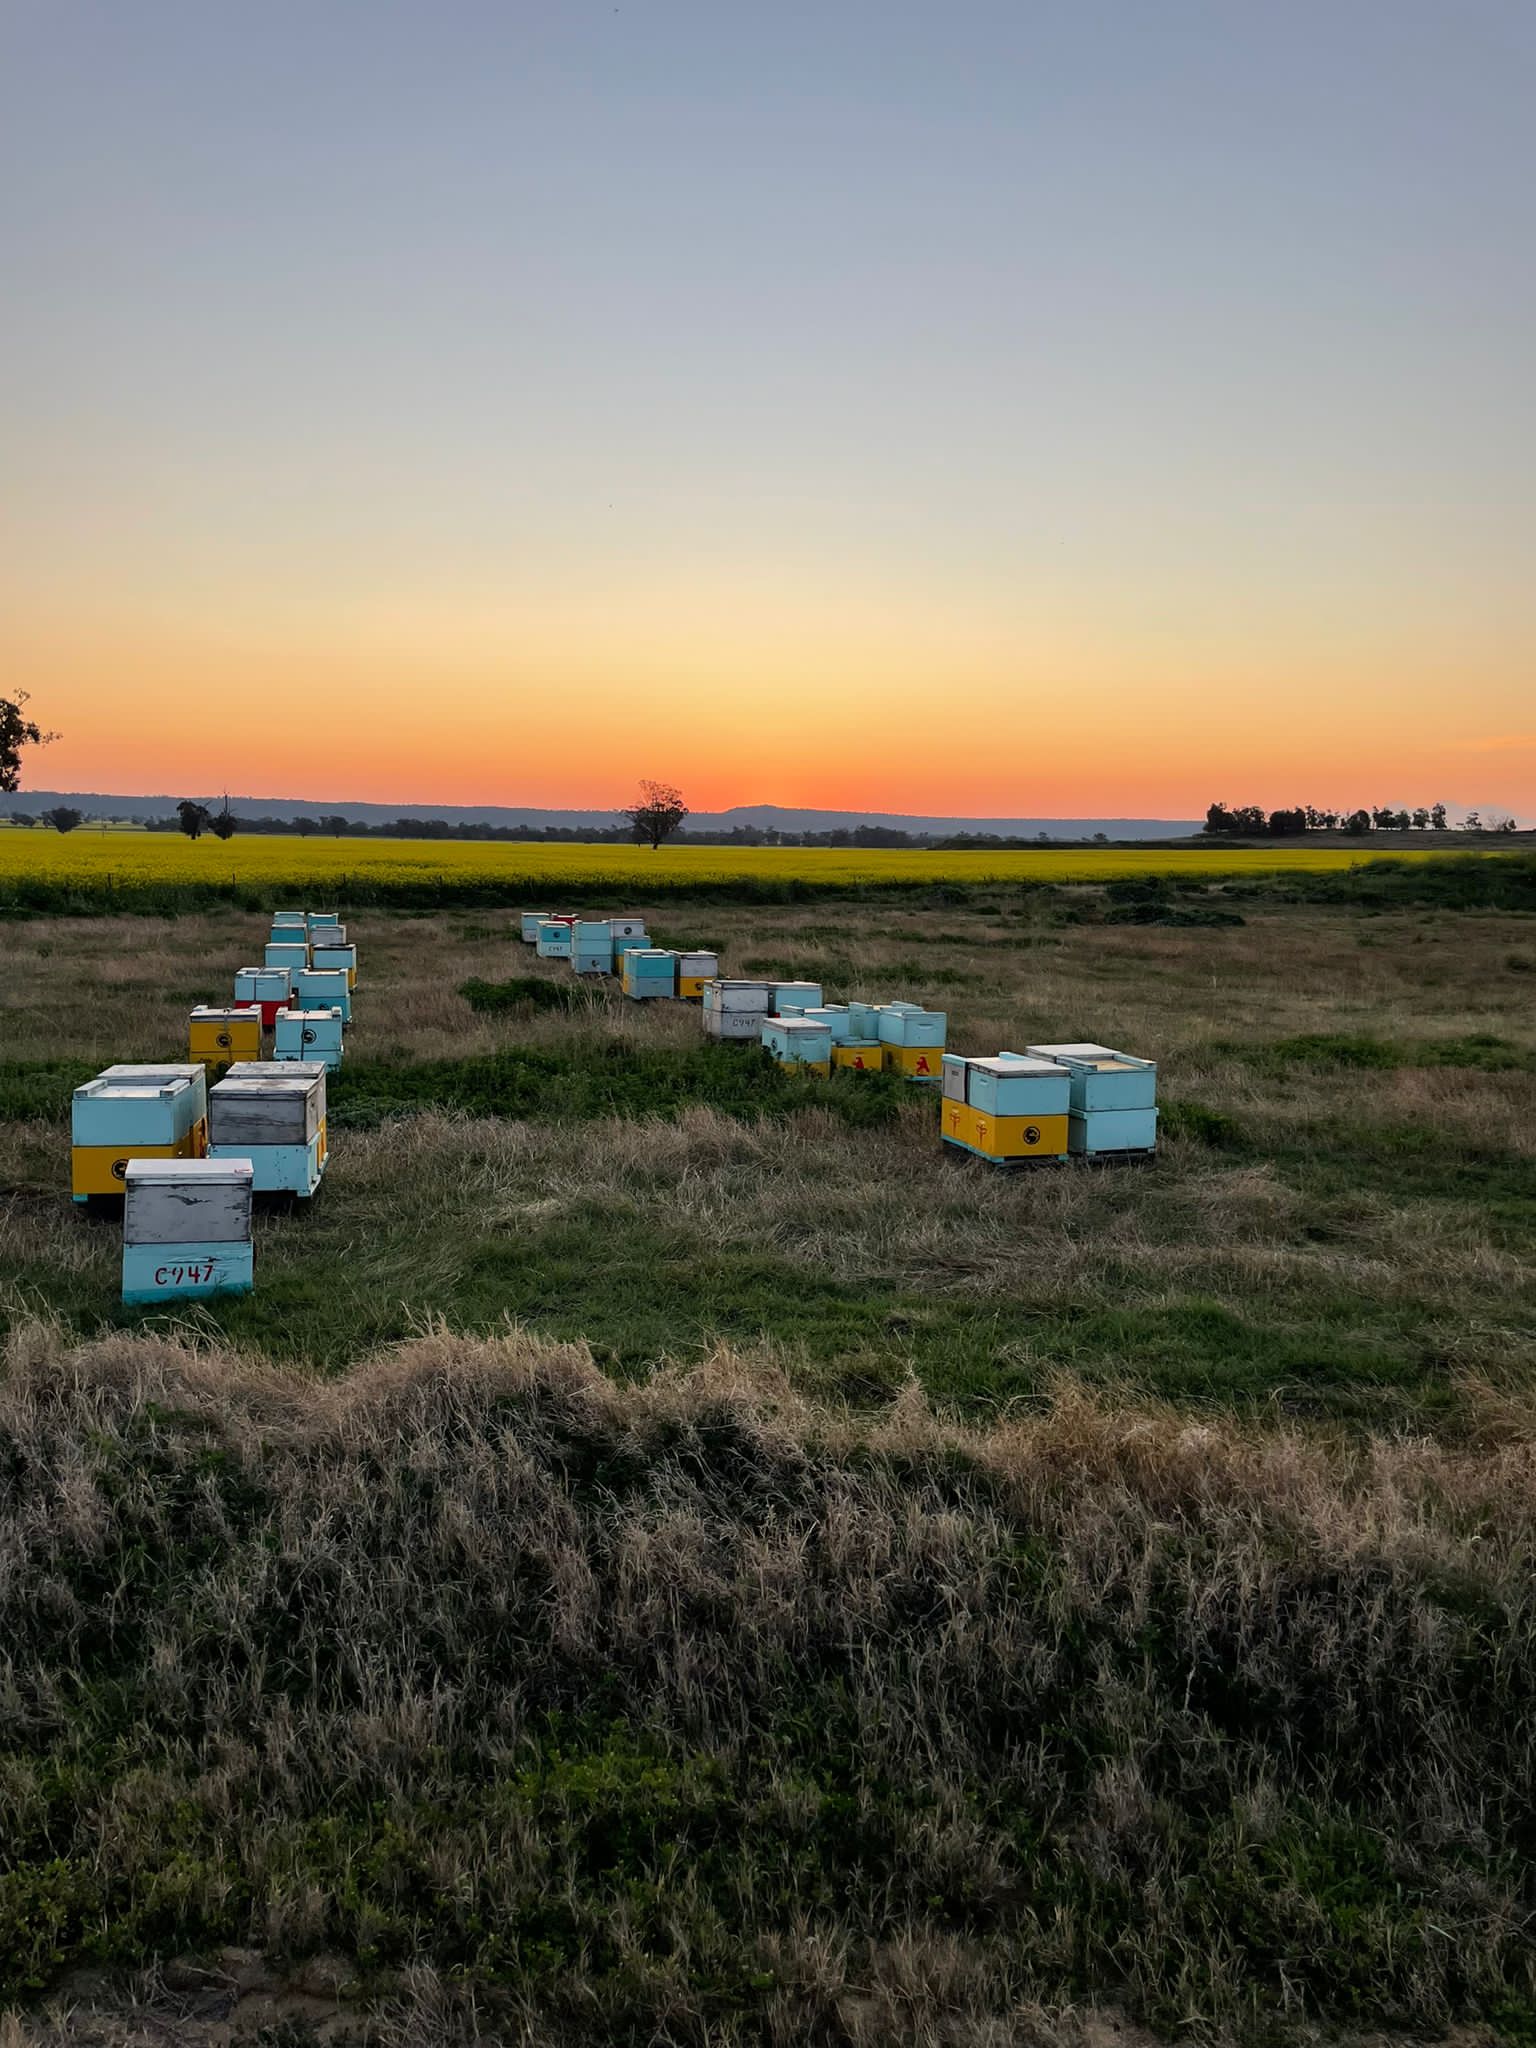 Load video: Here is a video flyby of one of our apiaries early in the morning.